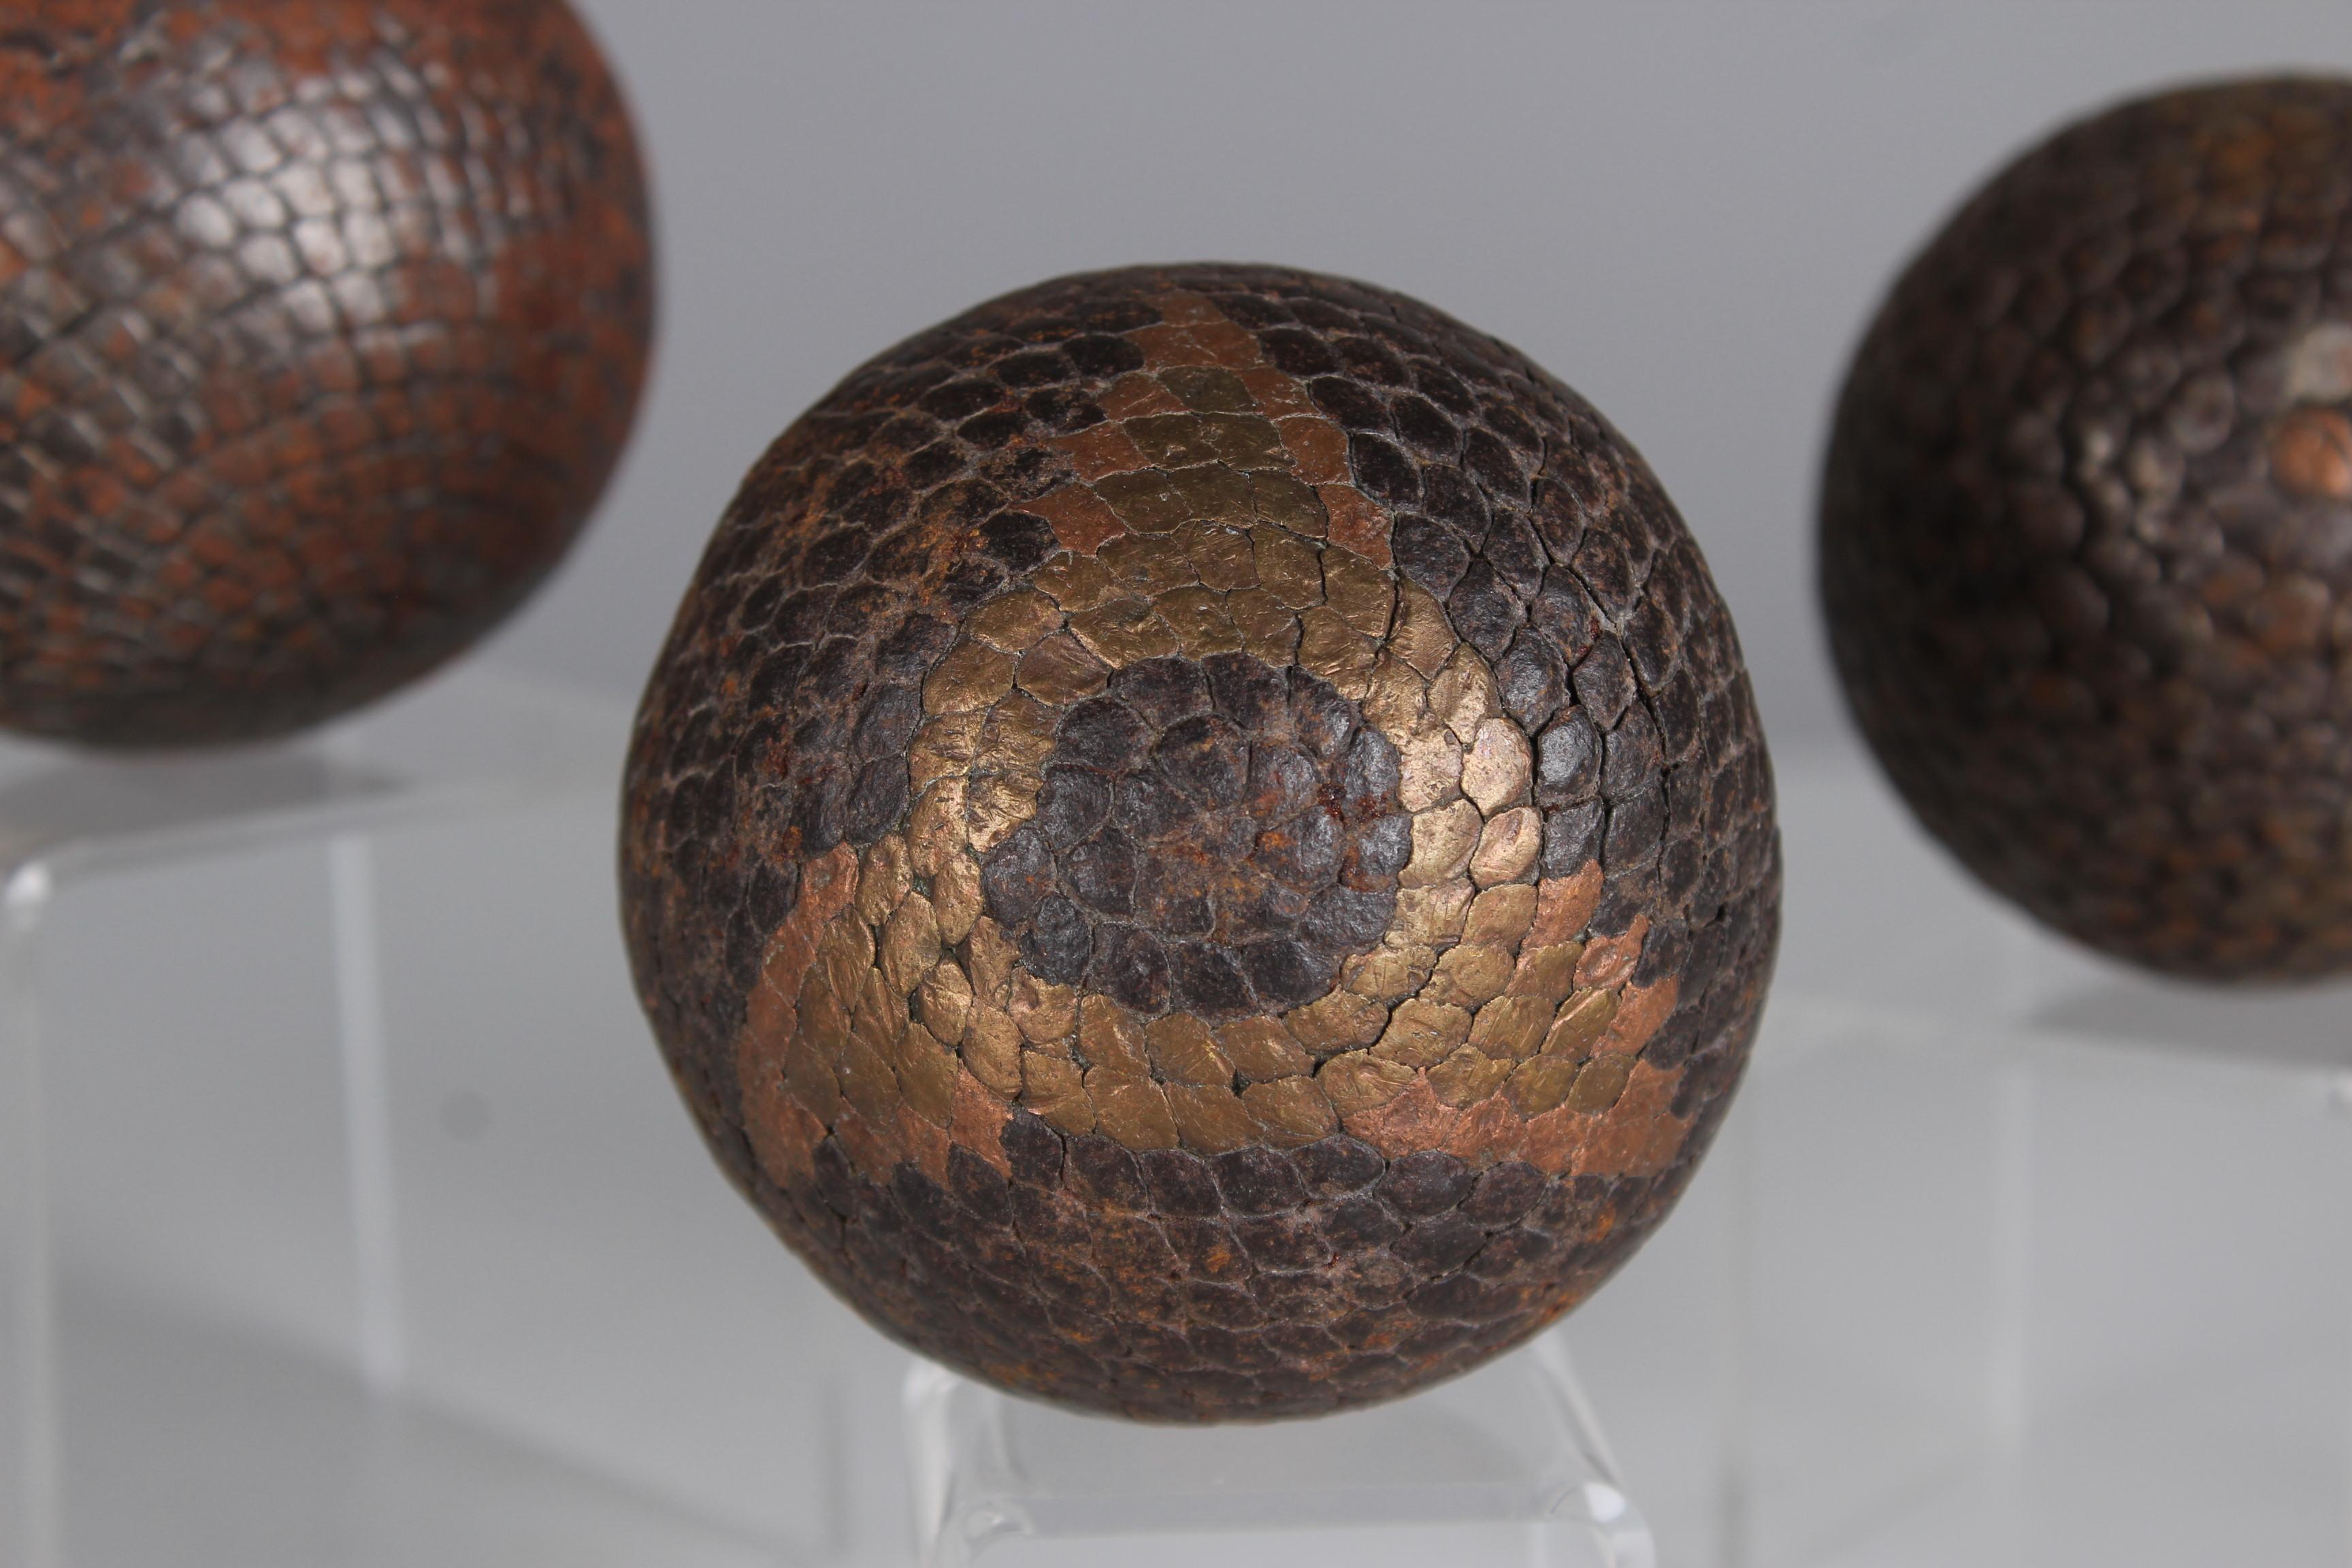 Beautiful, unique Boule set of three Boule balls, France, late 19th Century.

In the 19th century, the manufacture of boules balls underwent significant development in France as the game of boules, particularly the pétanque variant, gained in